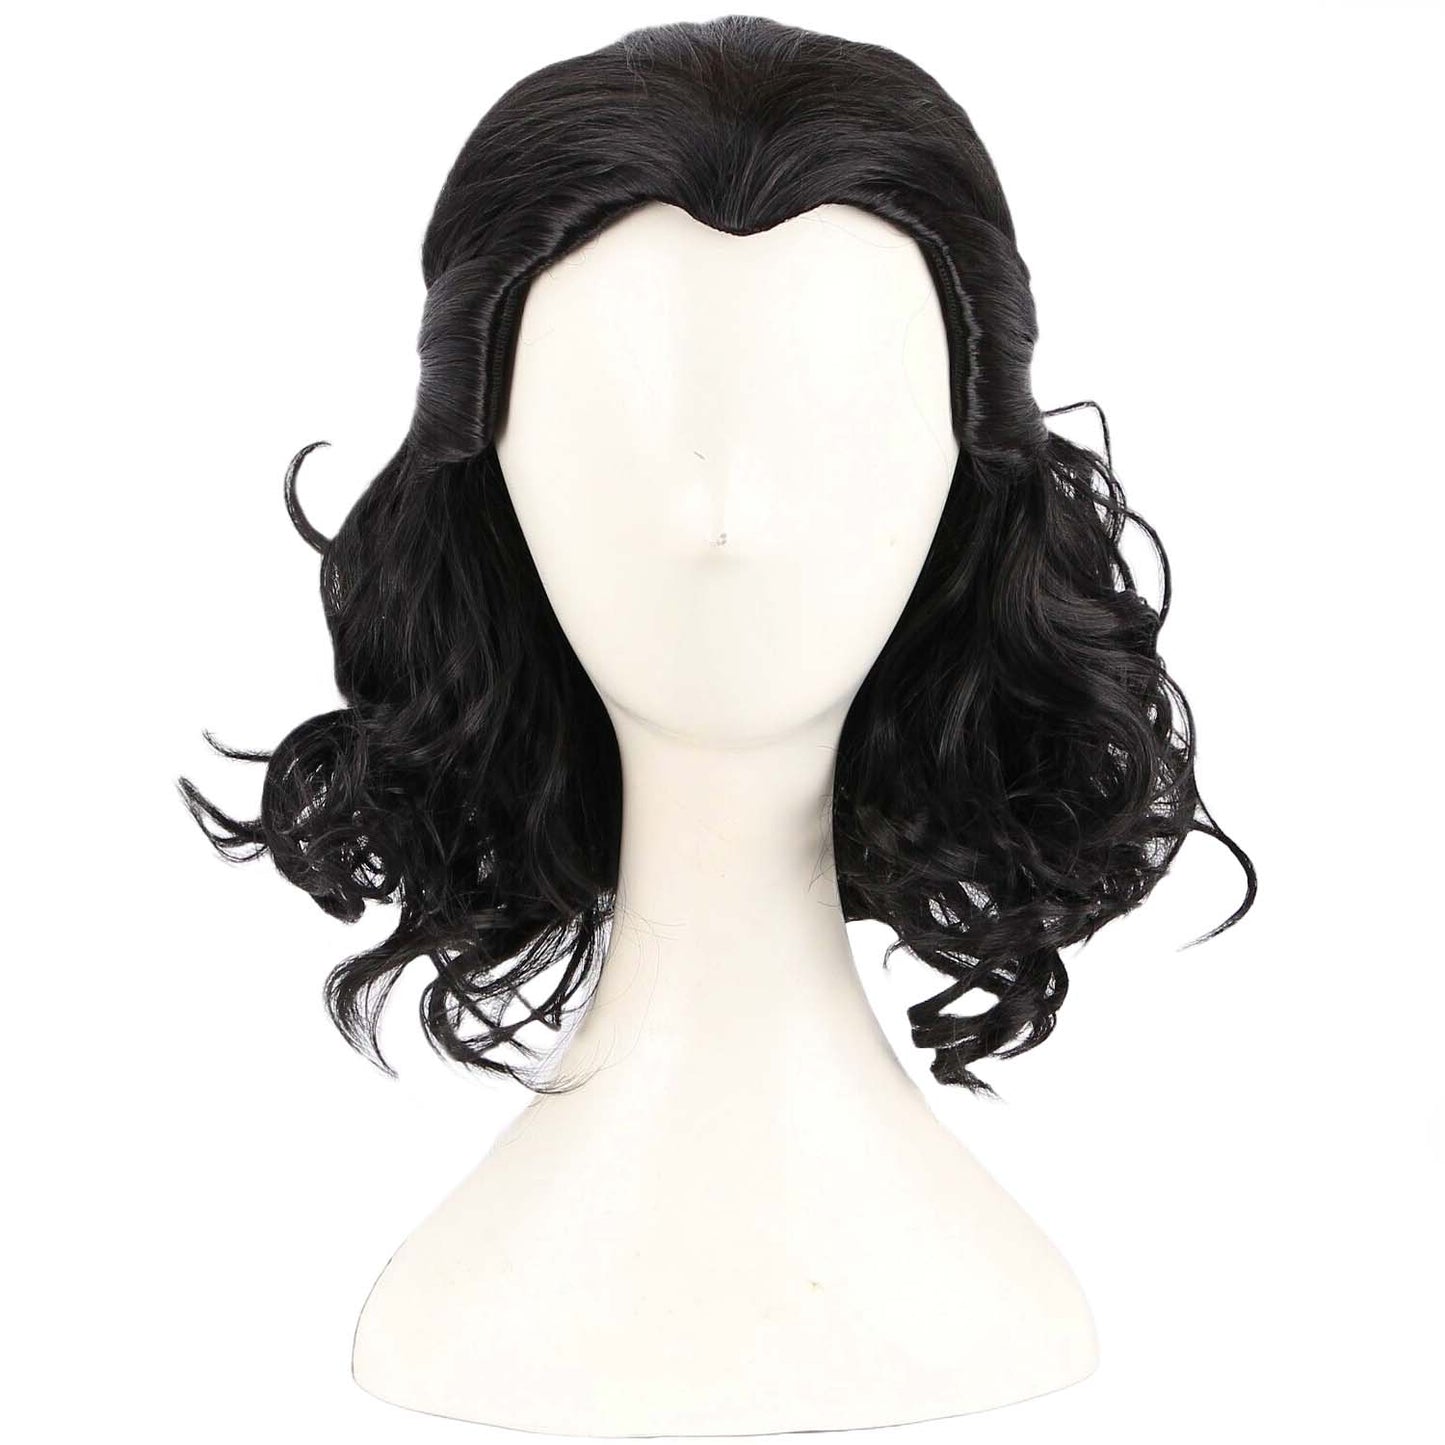 Loki Wig by Morojowig – Unleash the Power and Purpose of the God of Mischief!